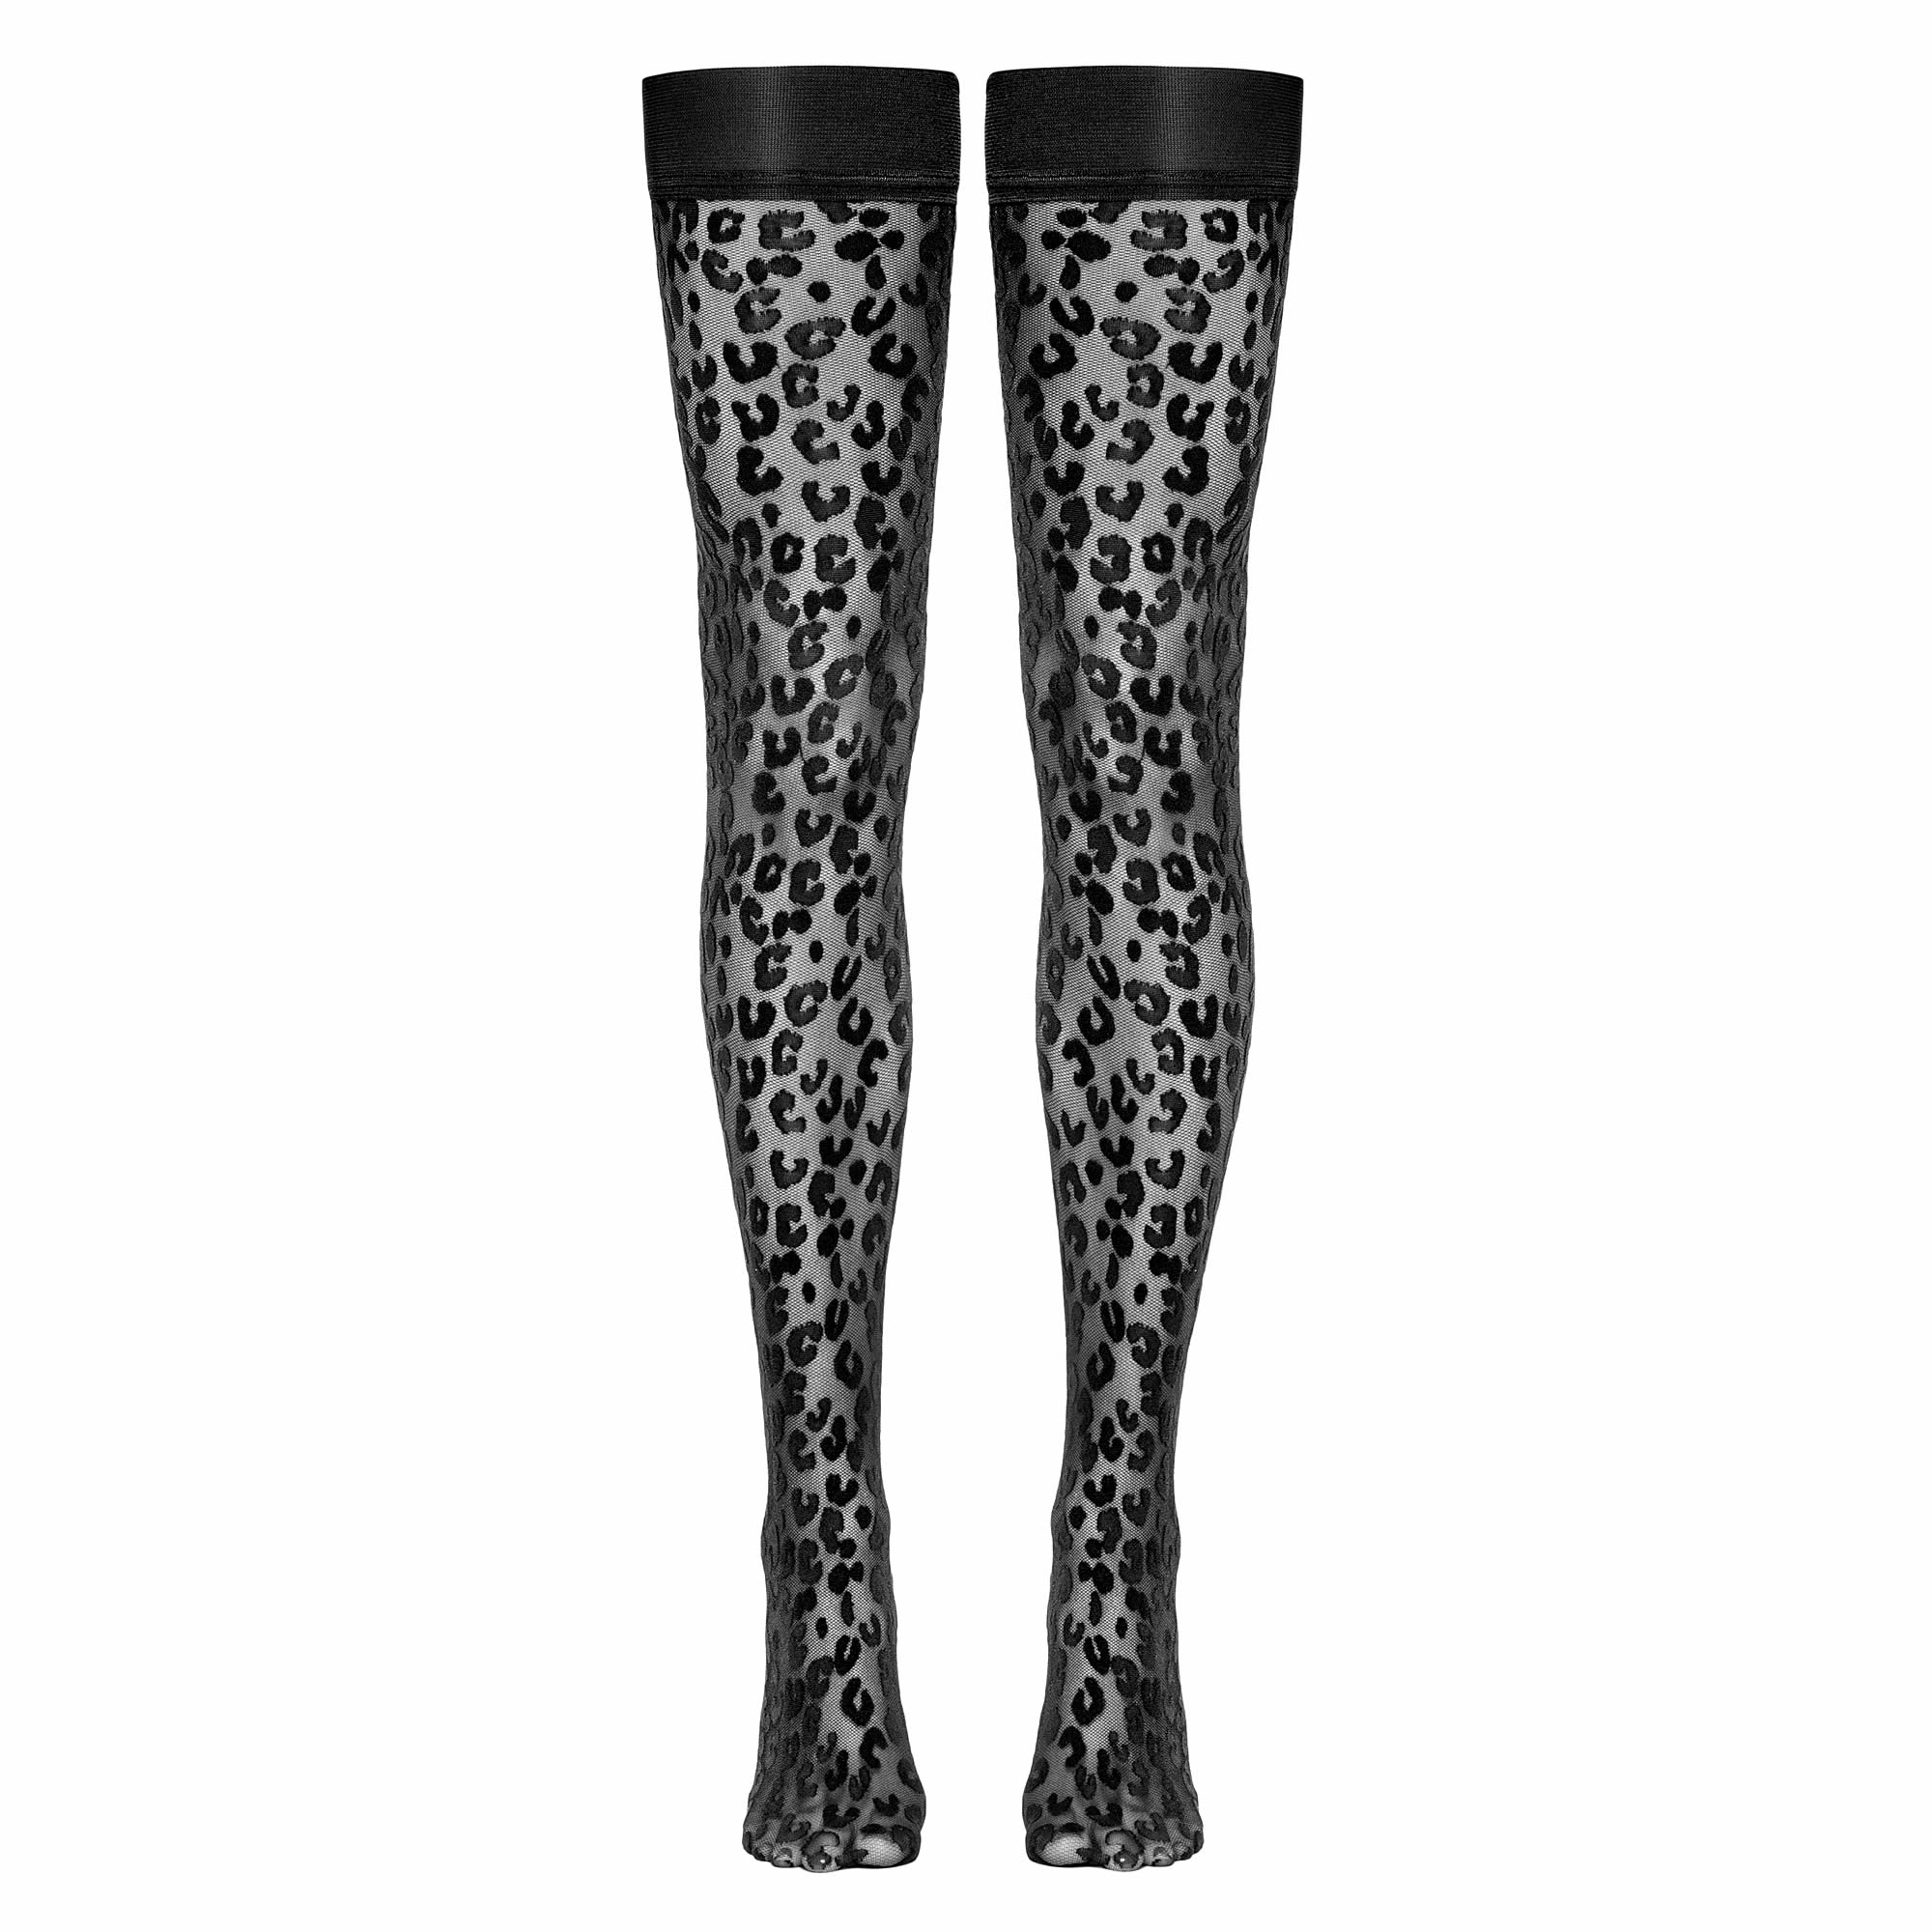 Stay-Up Stockings with Leopard Pattern